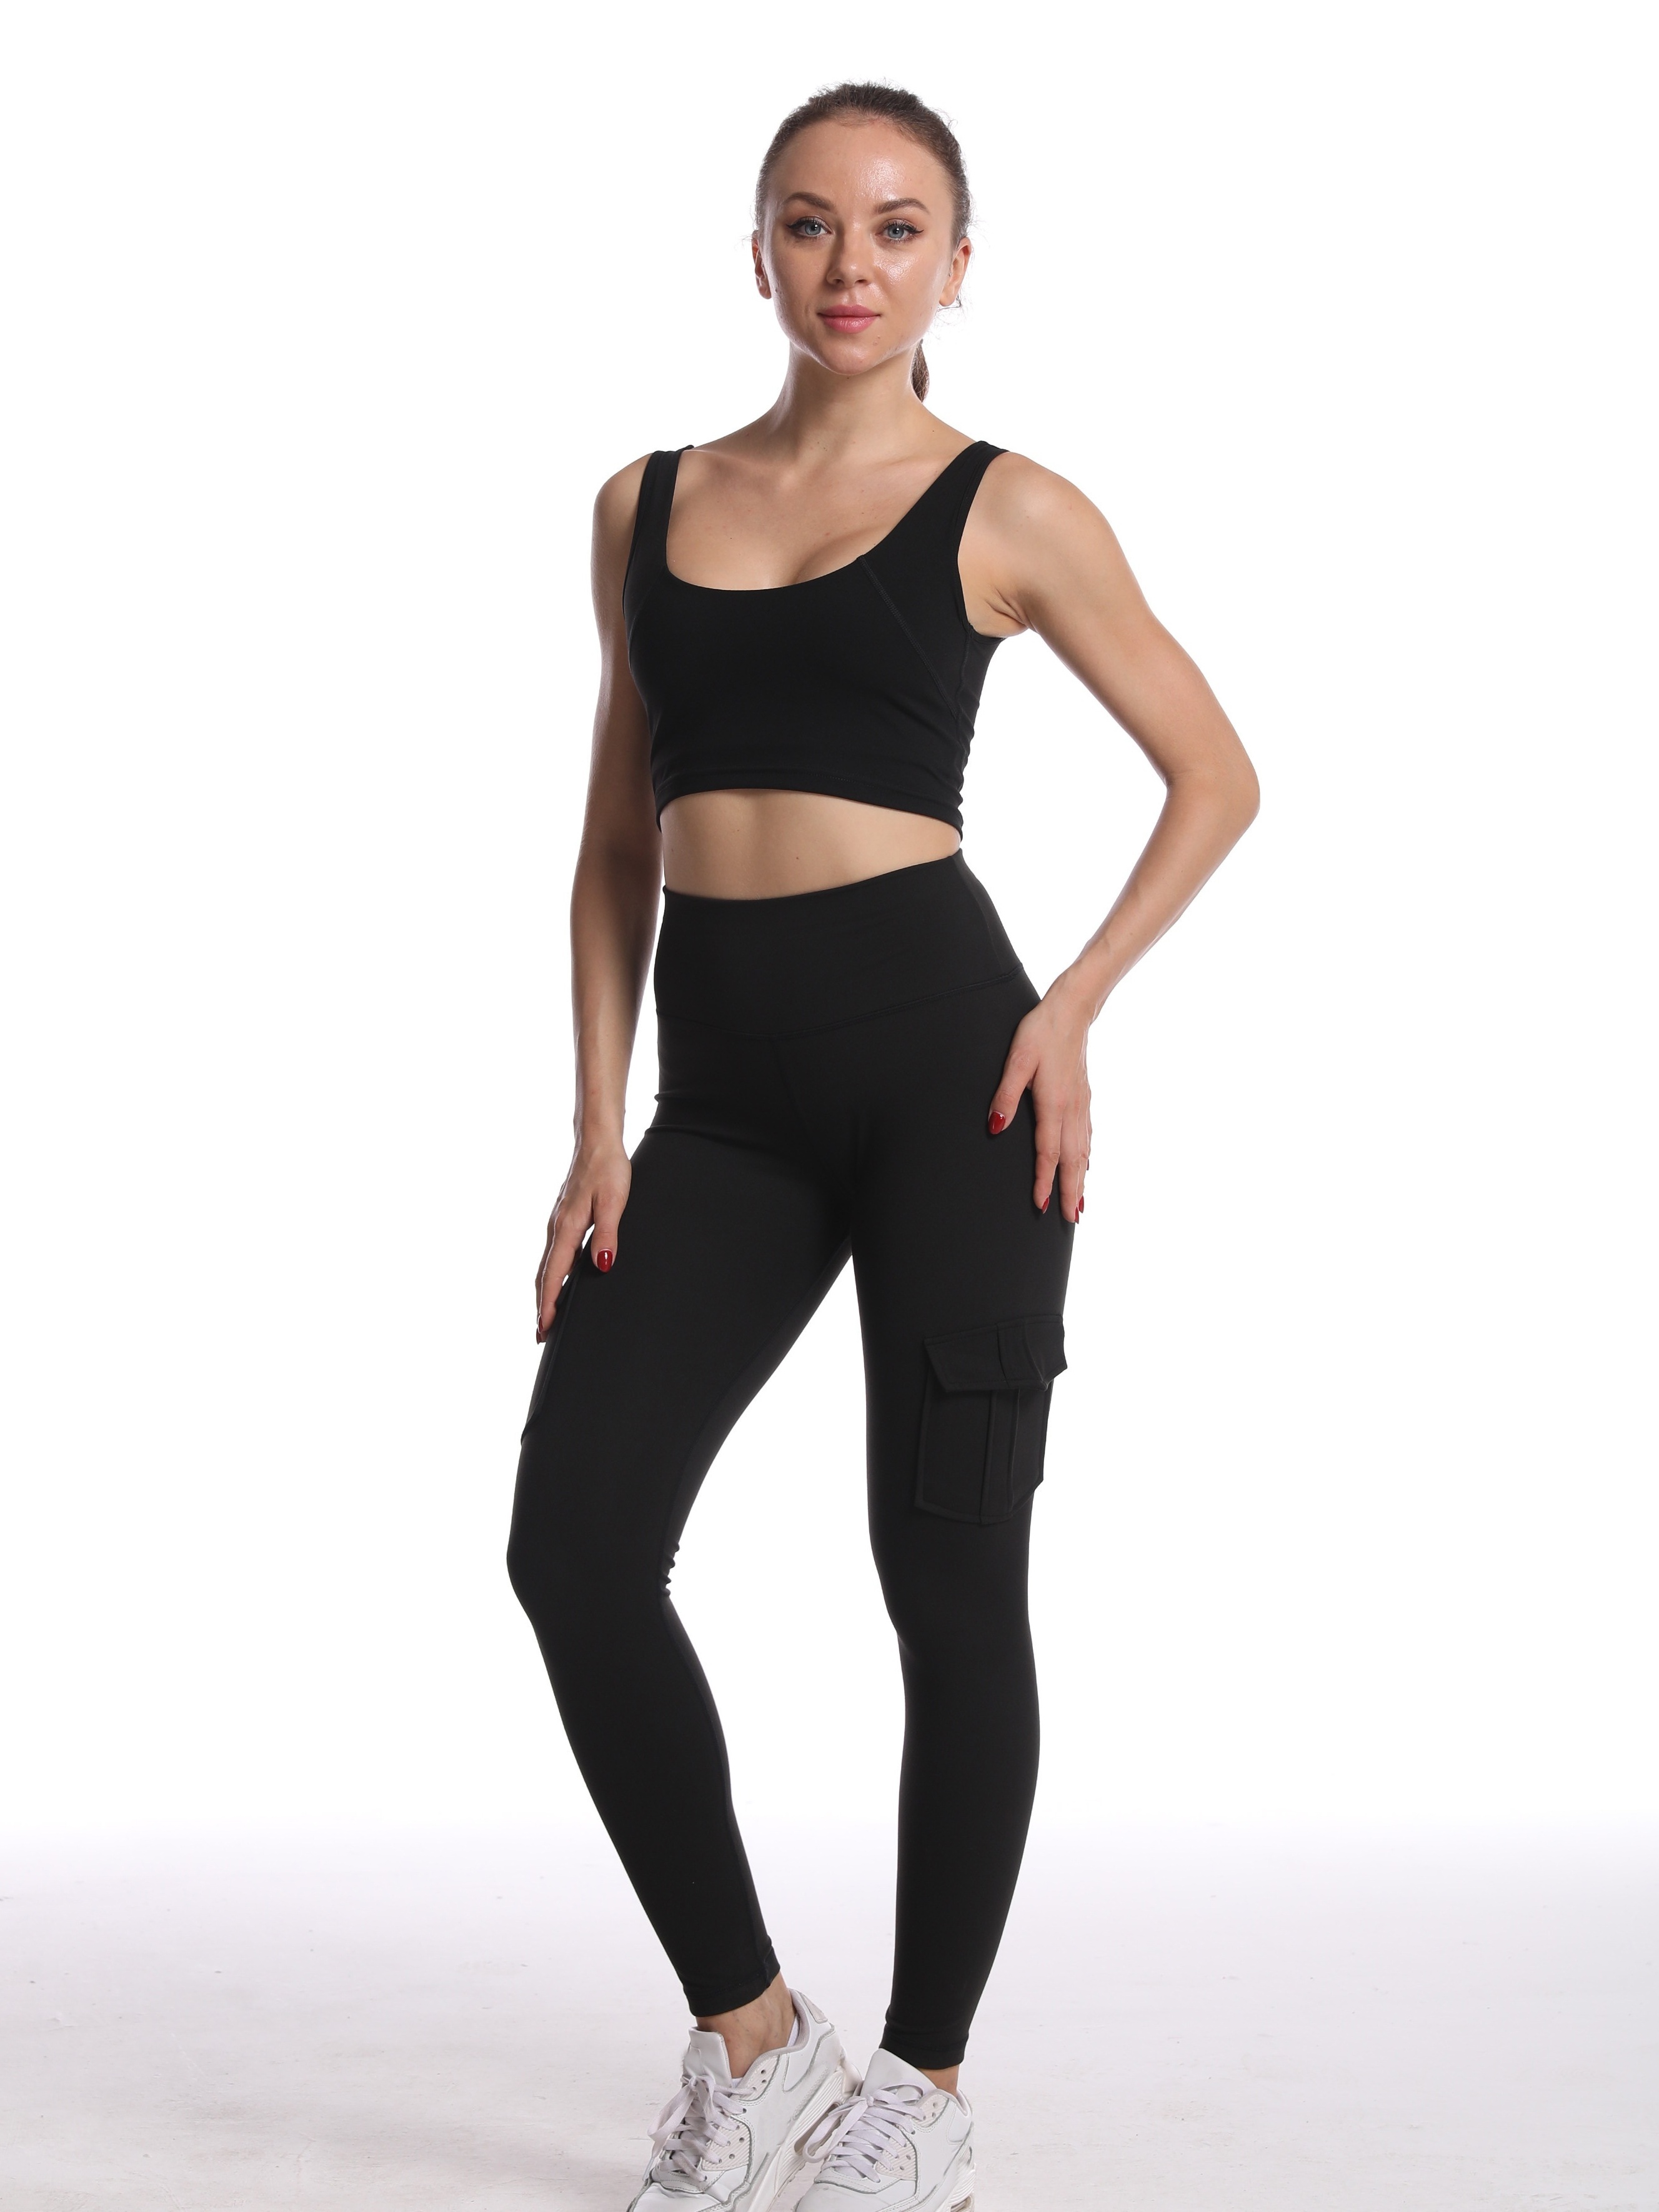 ZYIA Black High Waisted Crop Leggings Size 4 casual workout comfort running